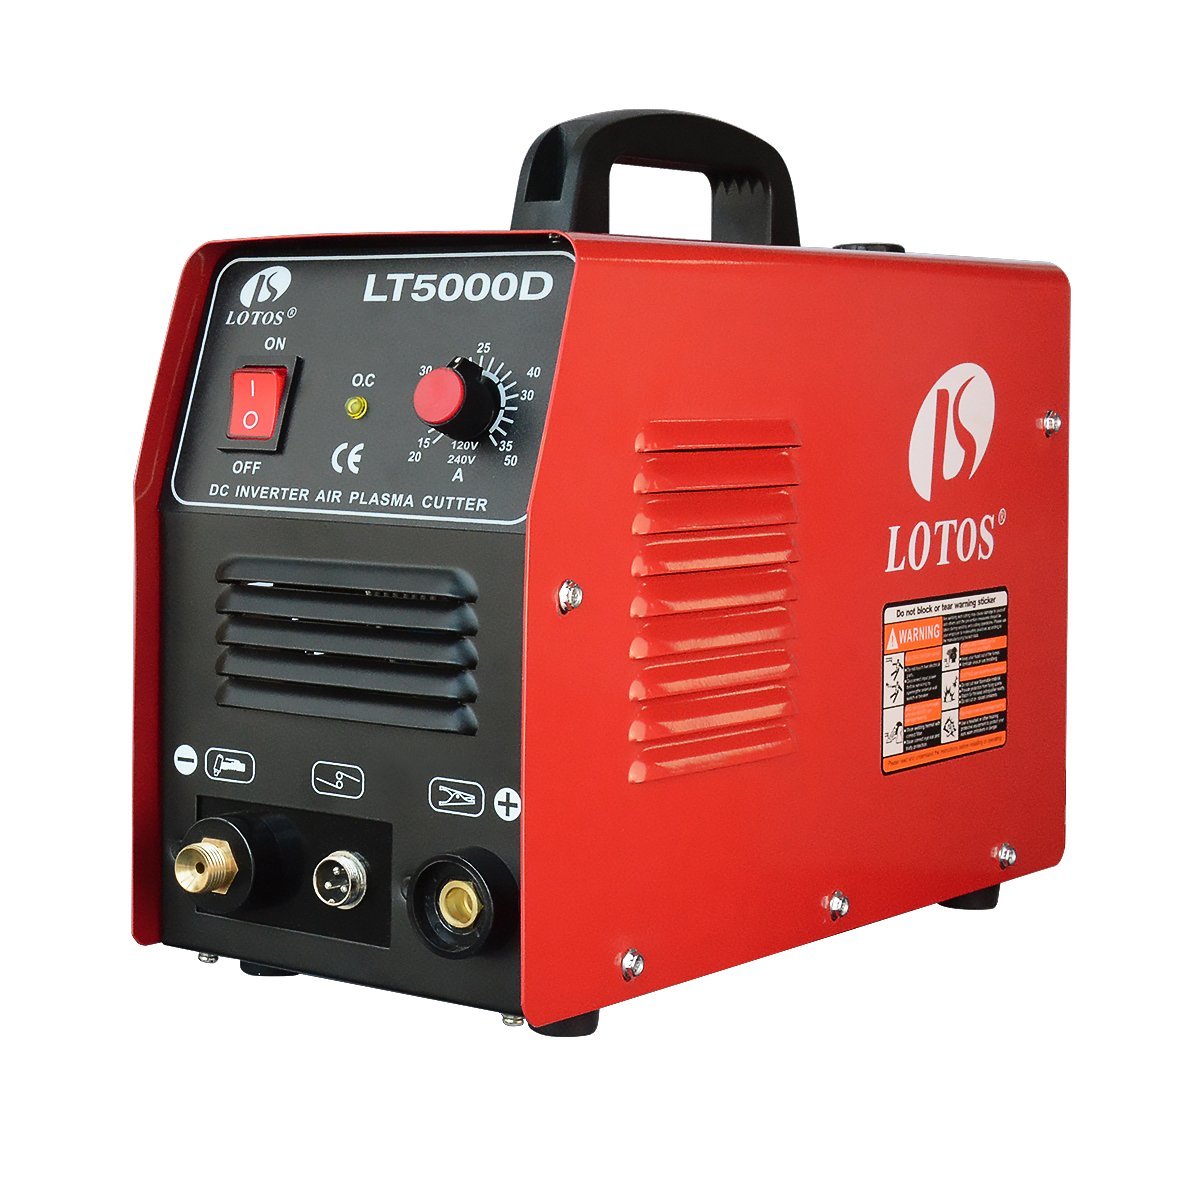 Image of Plasma Cutter Buyer's Guide: Lotos LT5000D